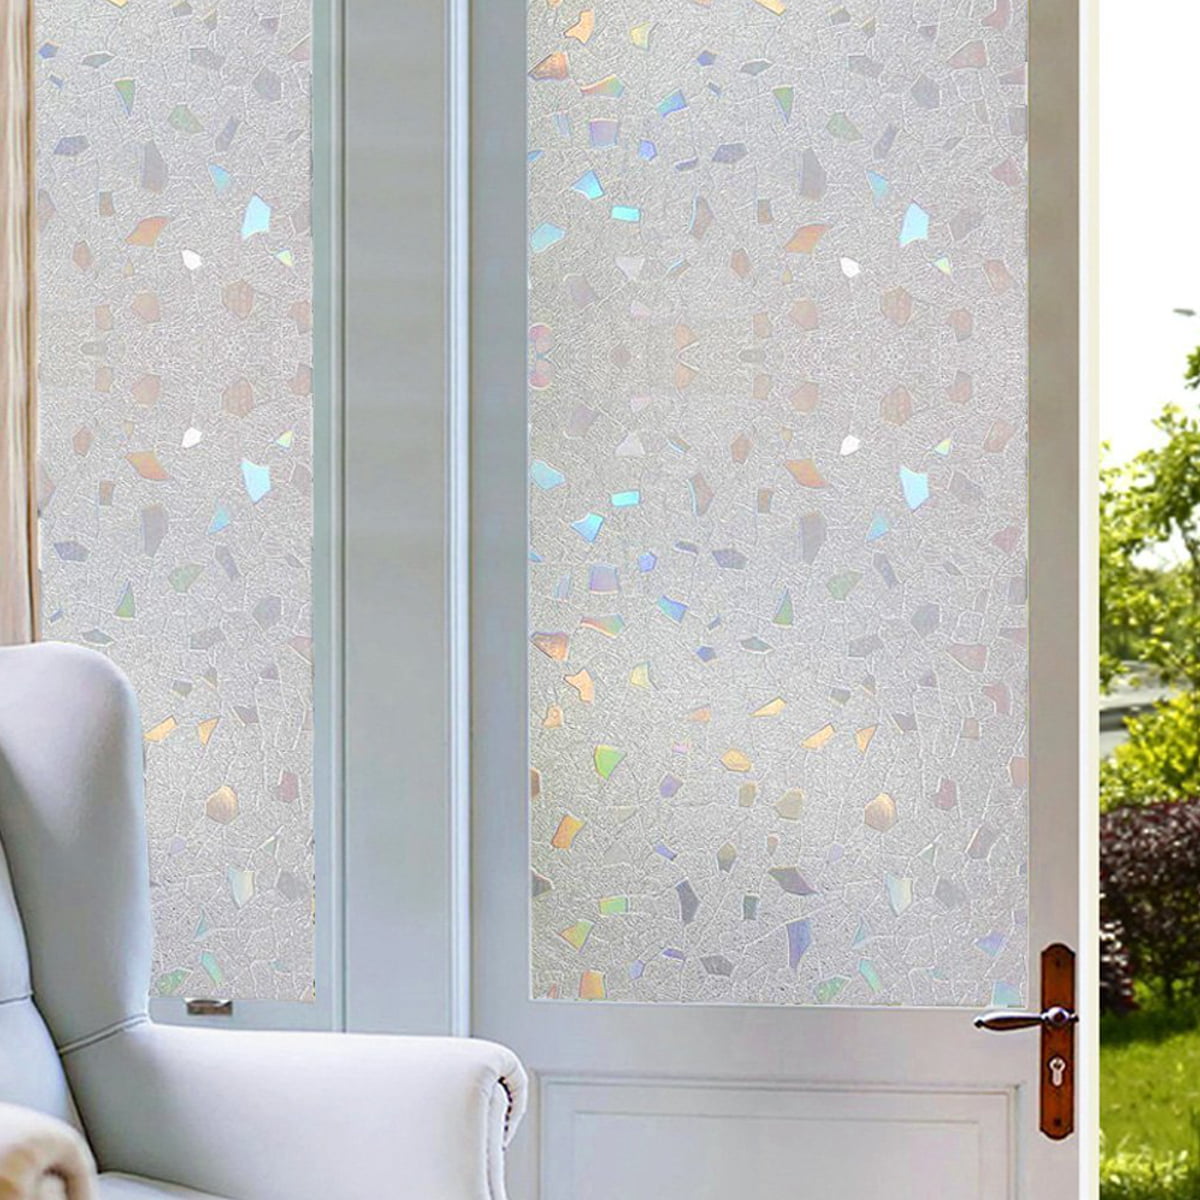 Details about   45x500cm Home Frosted Glass Window Film 3D Privacy Protection Film Decoration US 